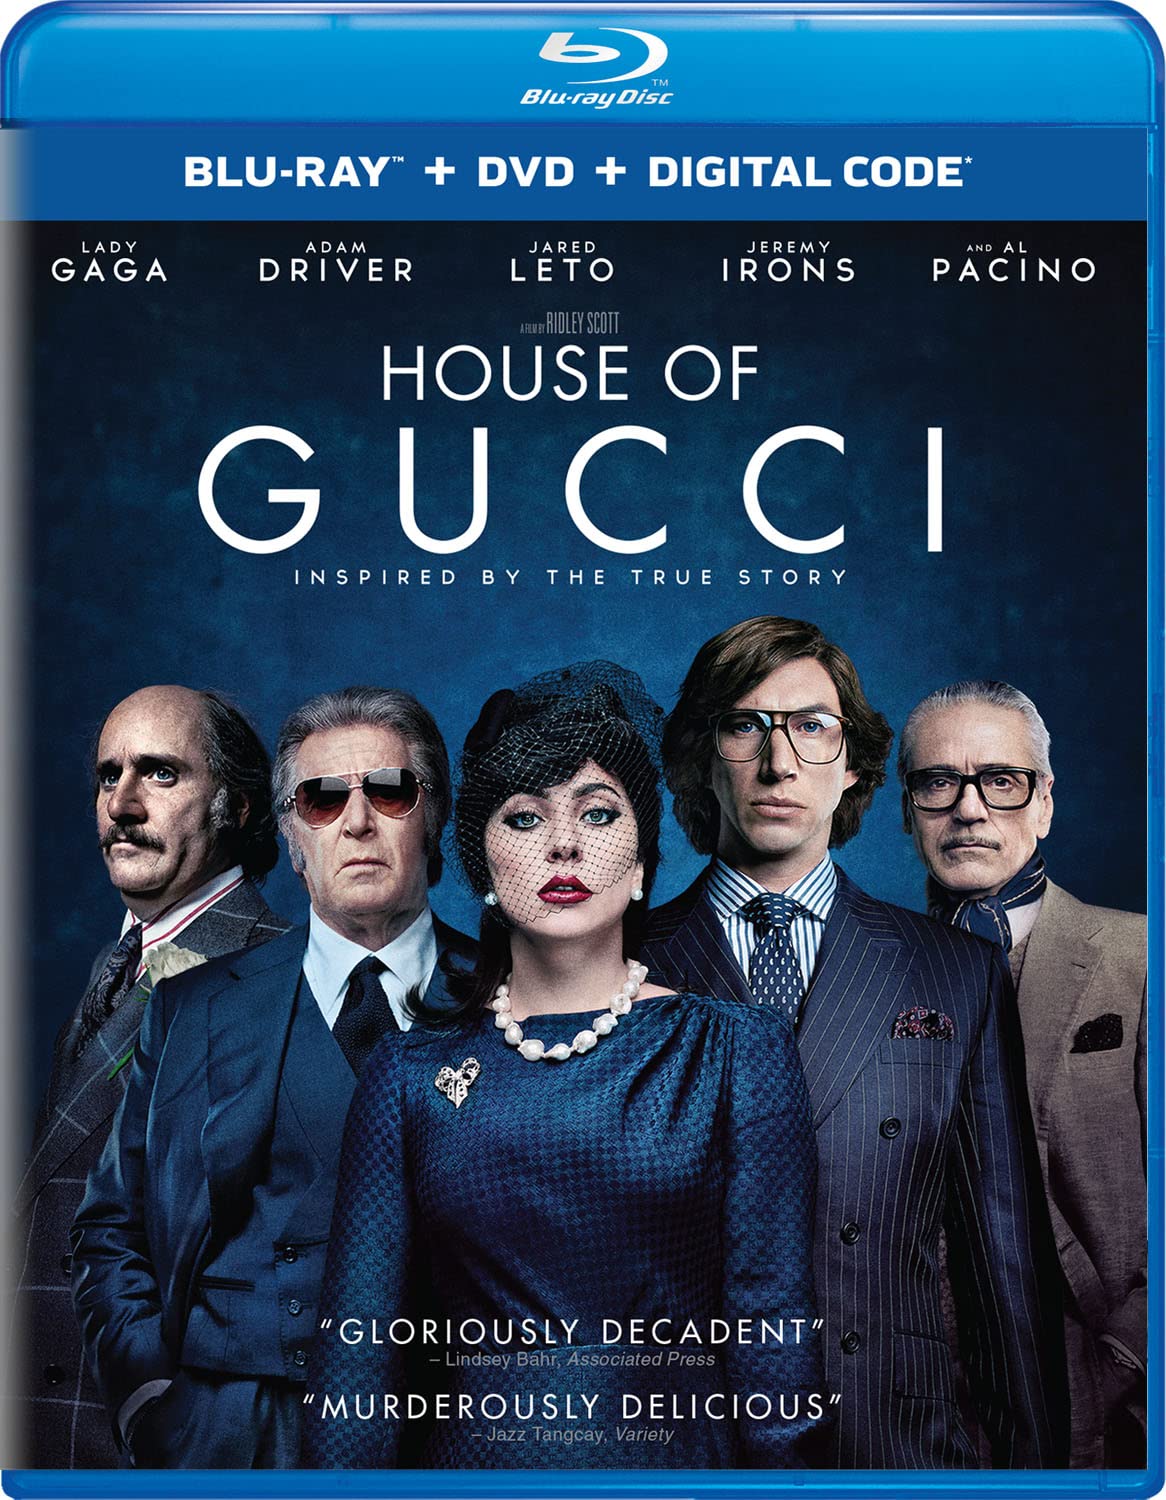 House of Gucci Blu-ray front